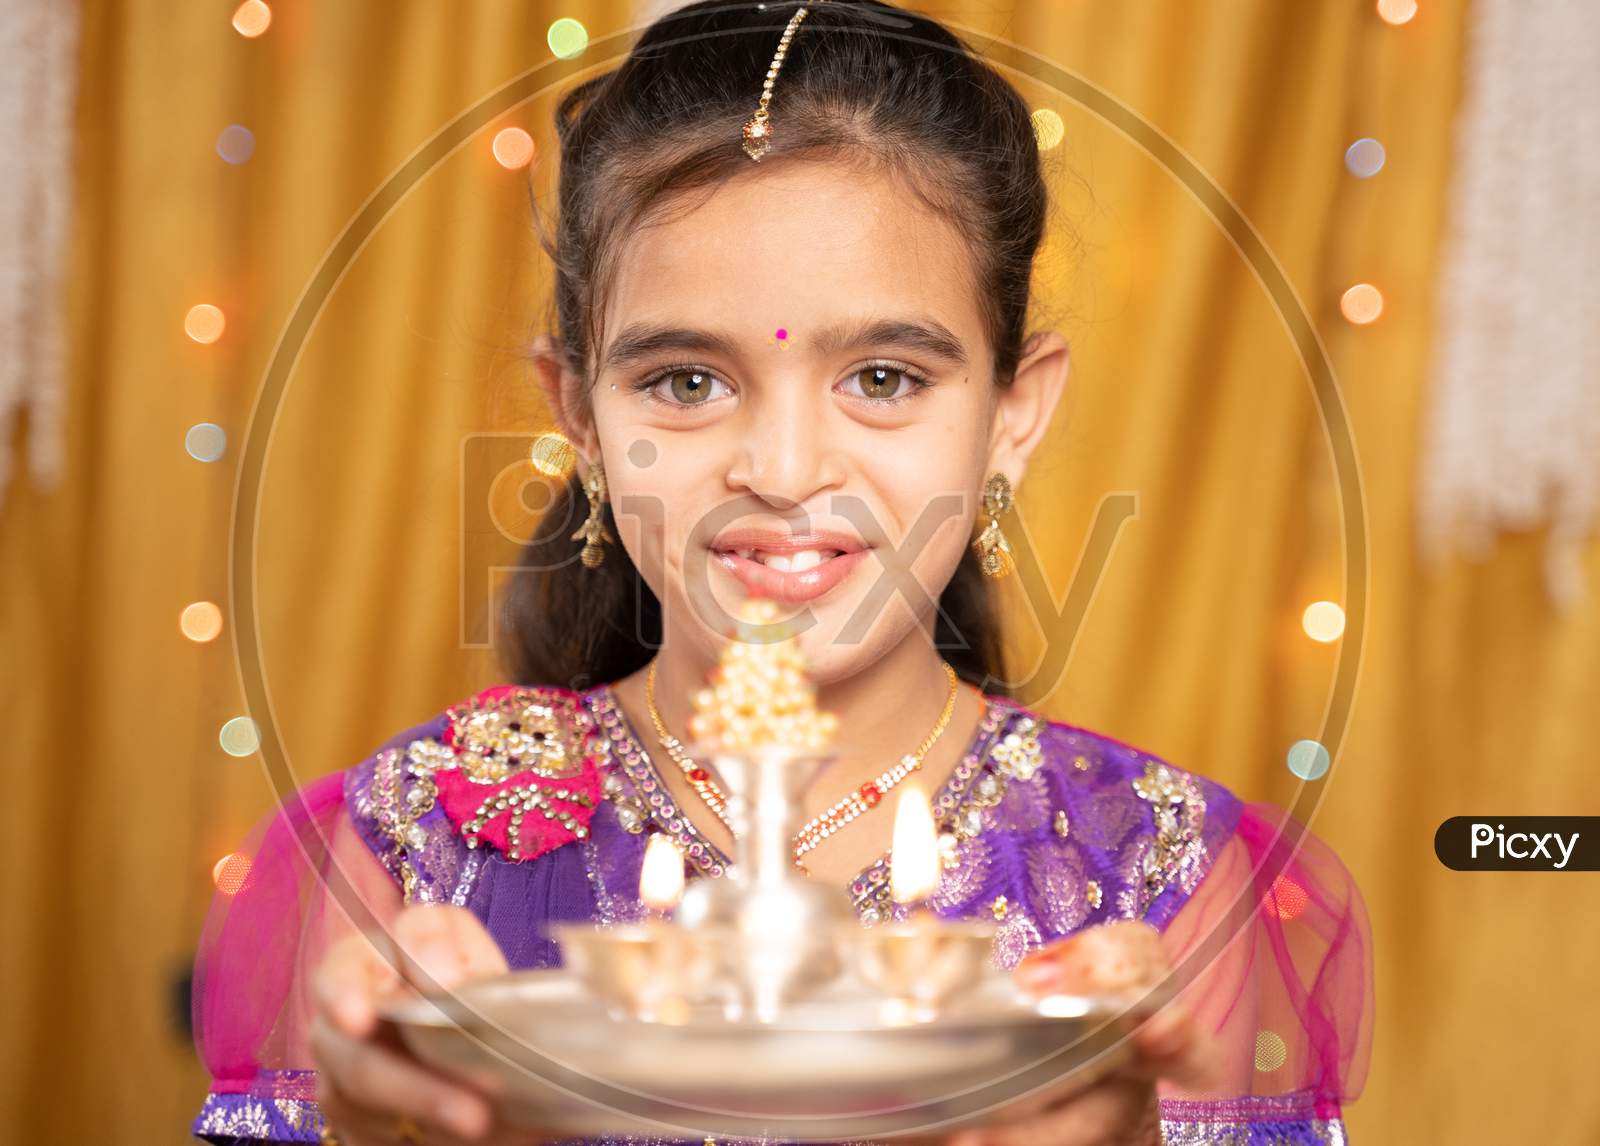 Pov Shot Of Cute Little Girl In Traditional Dress Doing Aarti Or Offering Light To God During Hindu Religious Festival Ceremony.